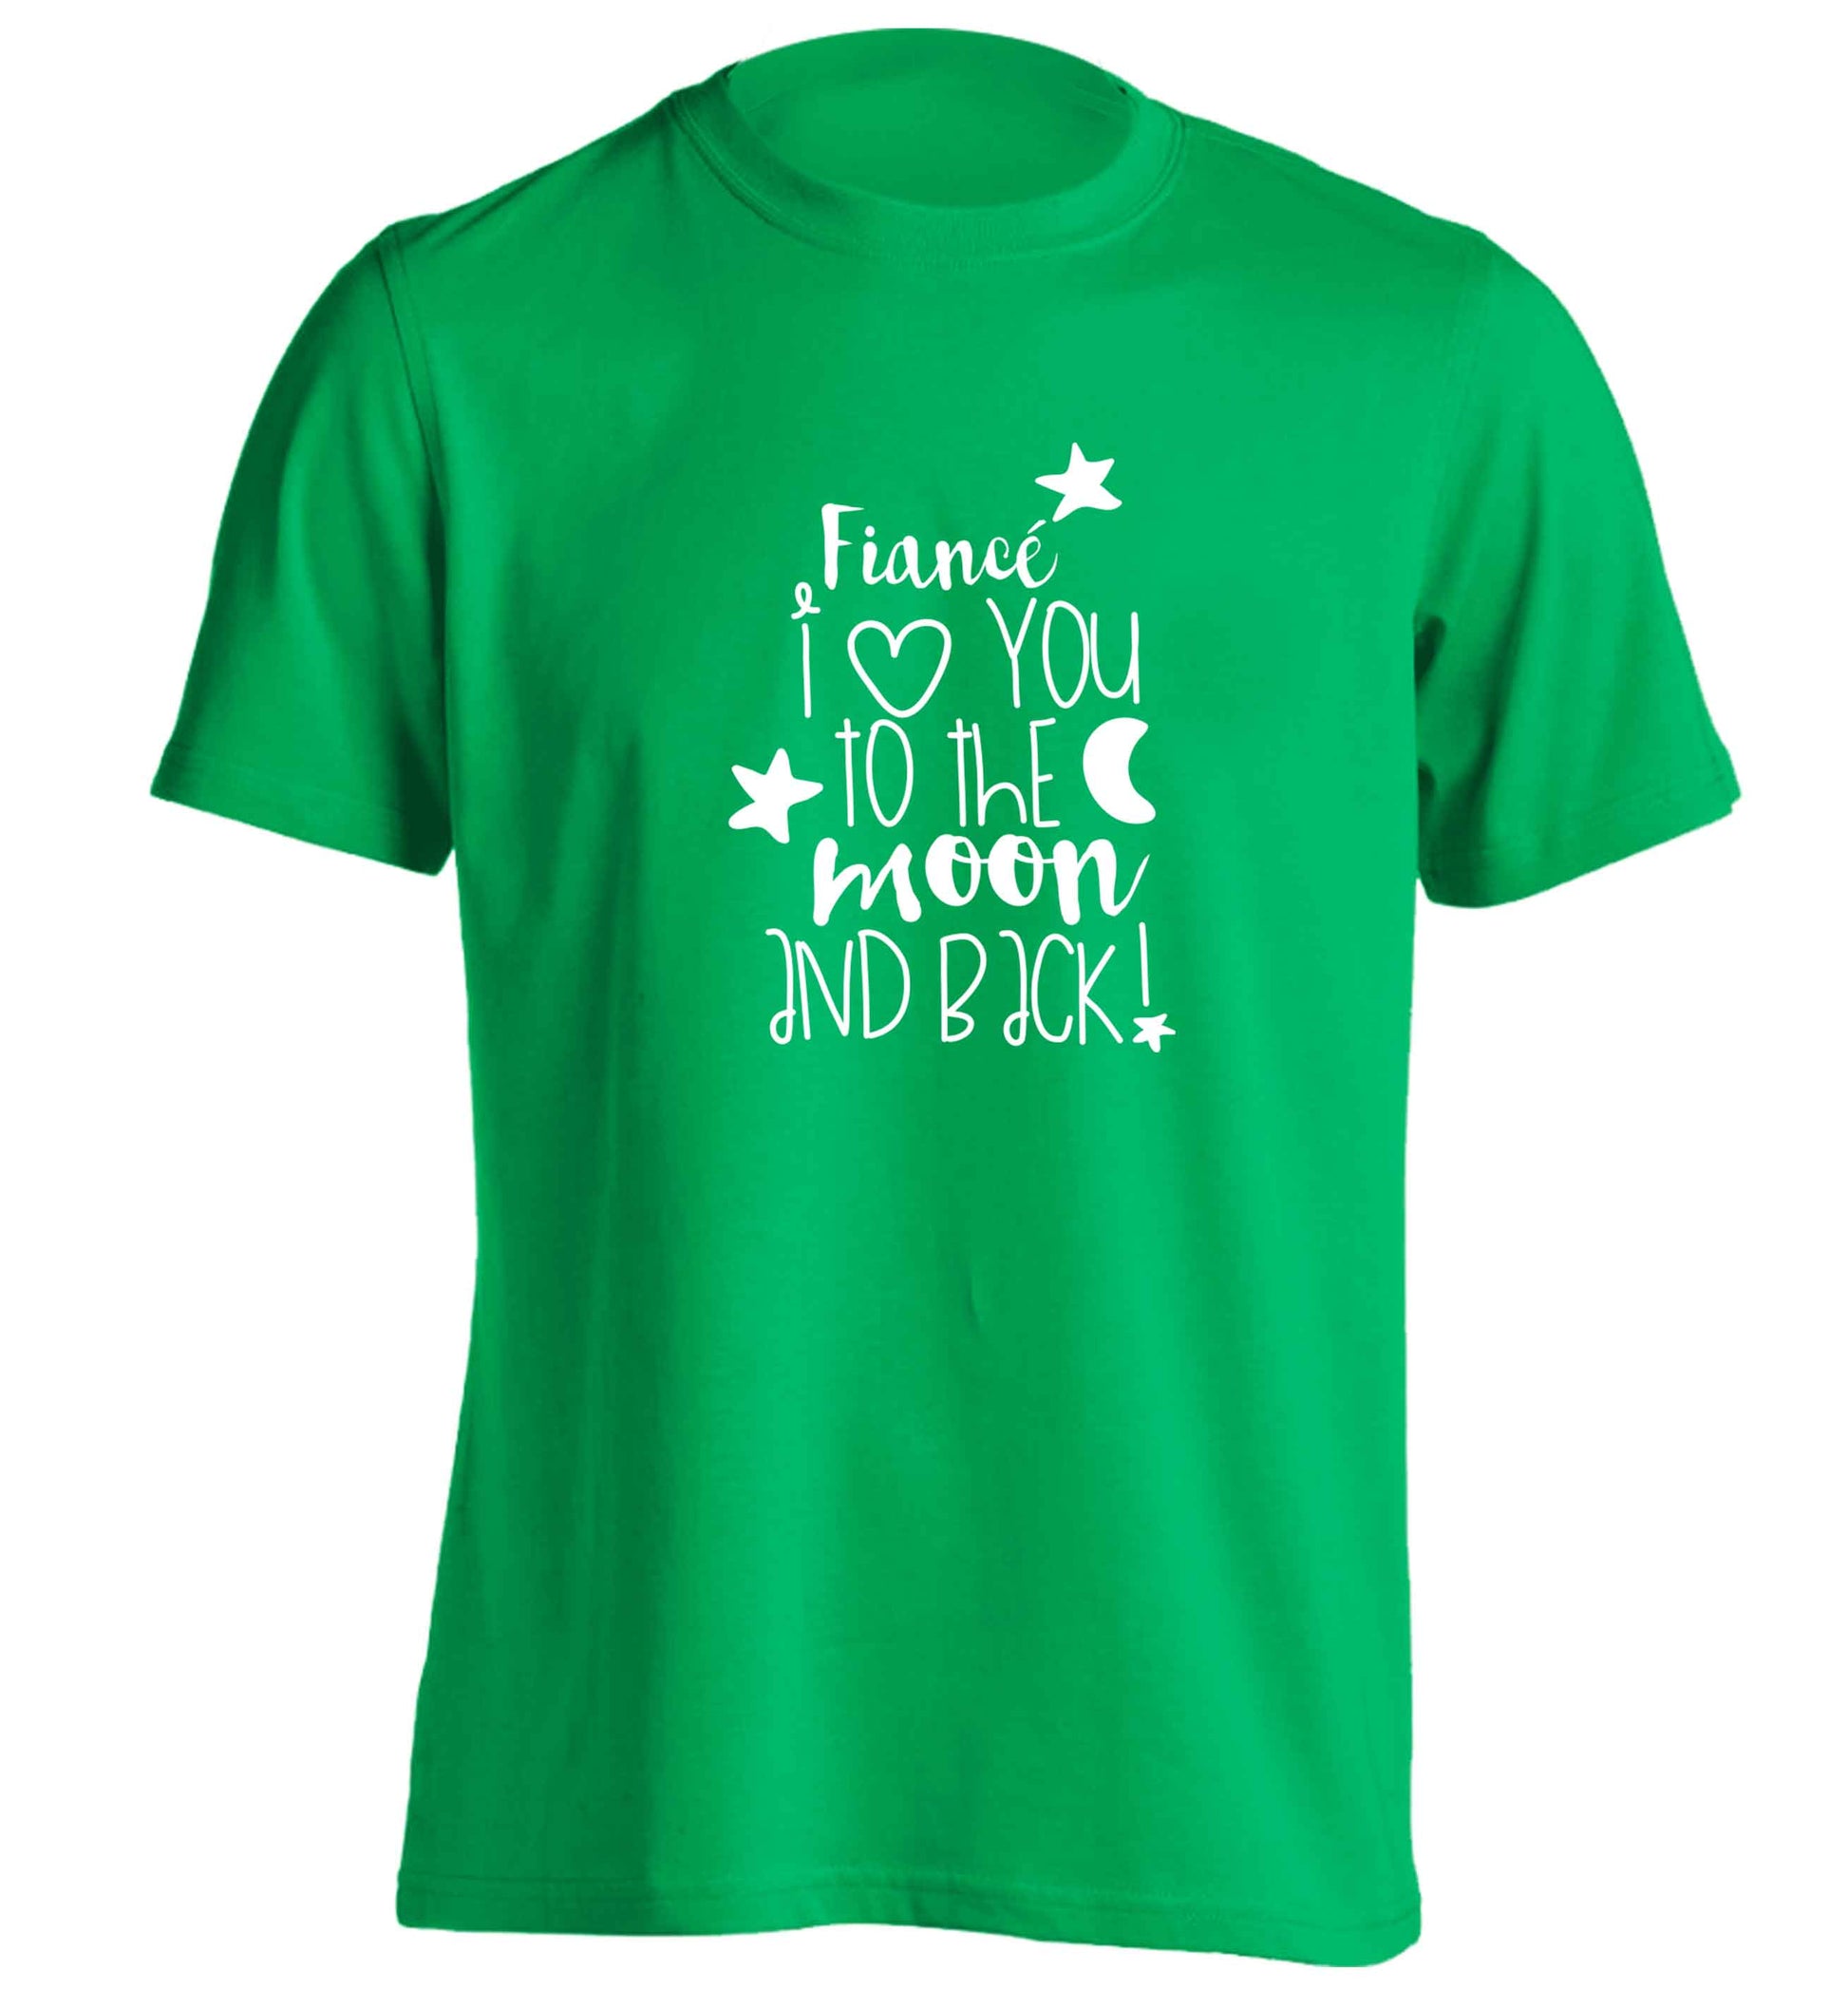 Fianc√© I love you to the moon and back adults unisex green Tshirt 2XL